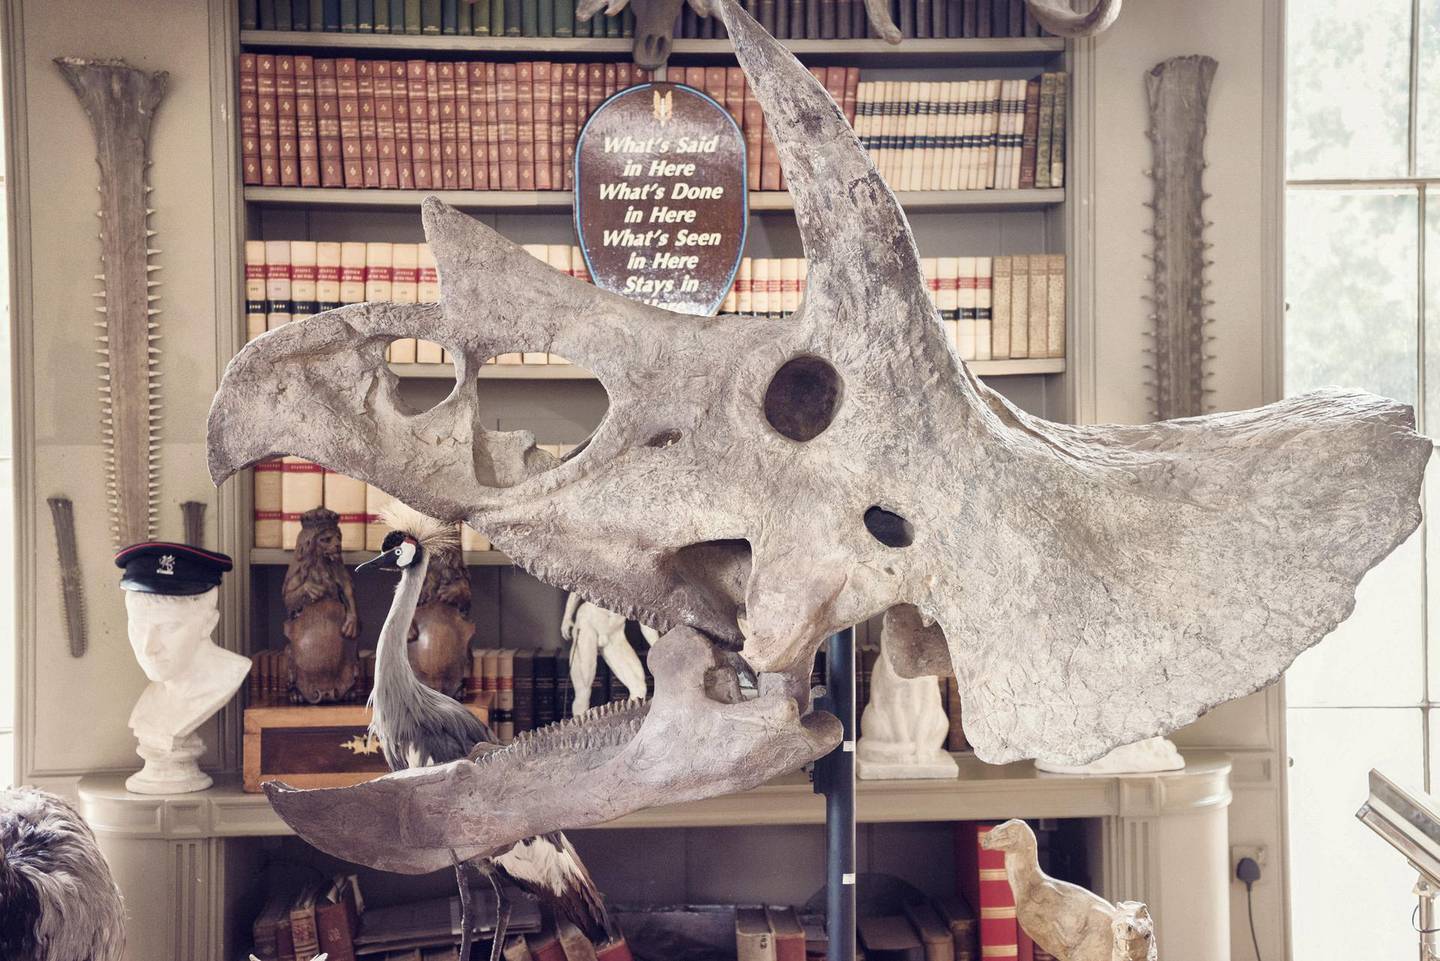 Lot 186: the skull of a triceratops. Courtesy Dreweatts